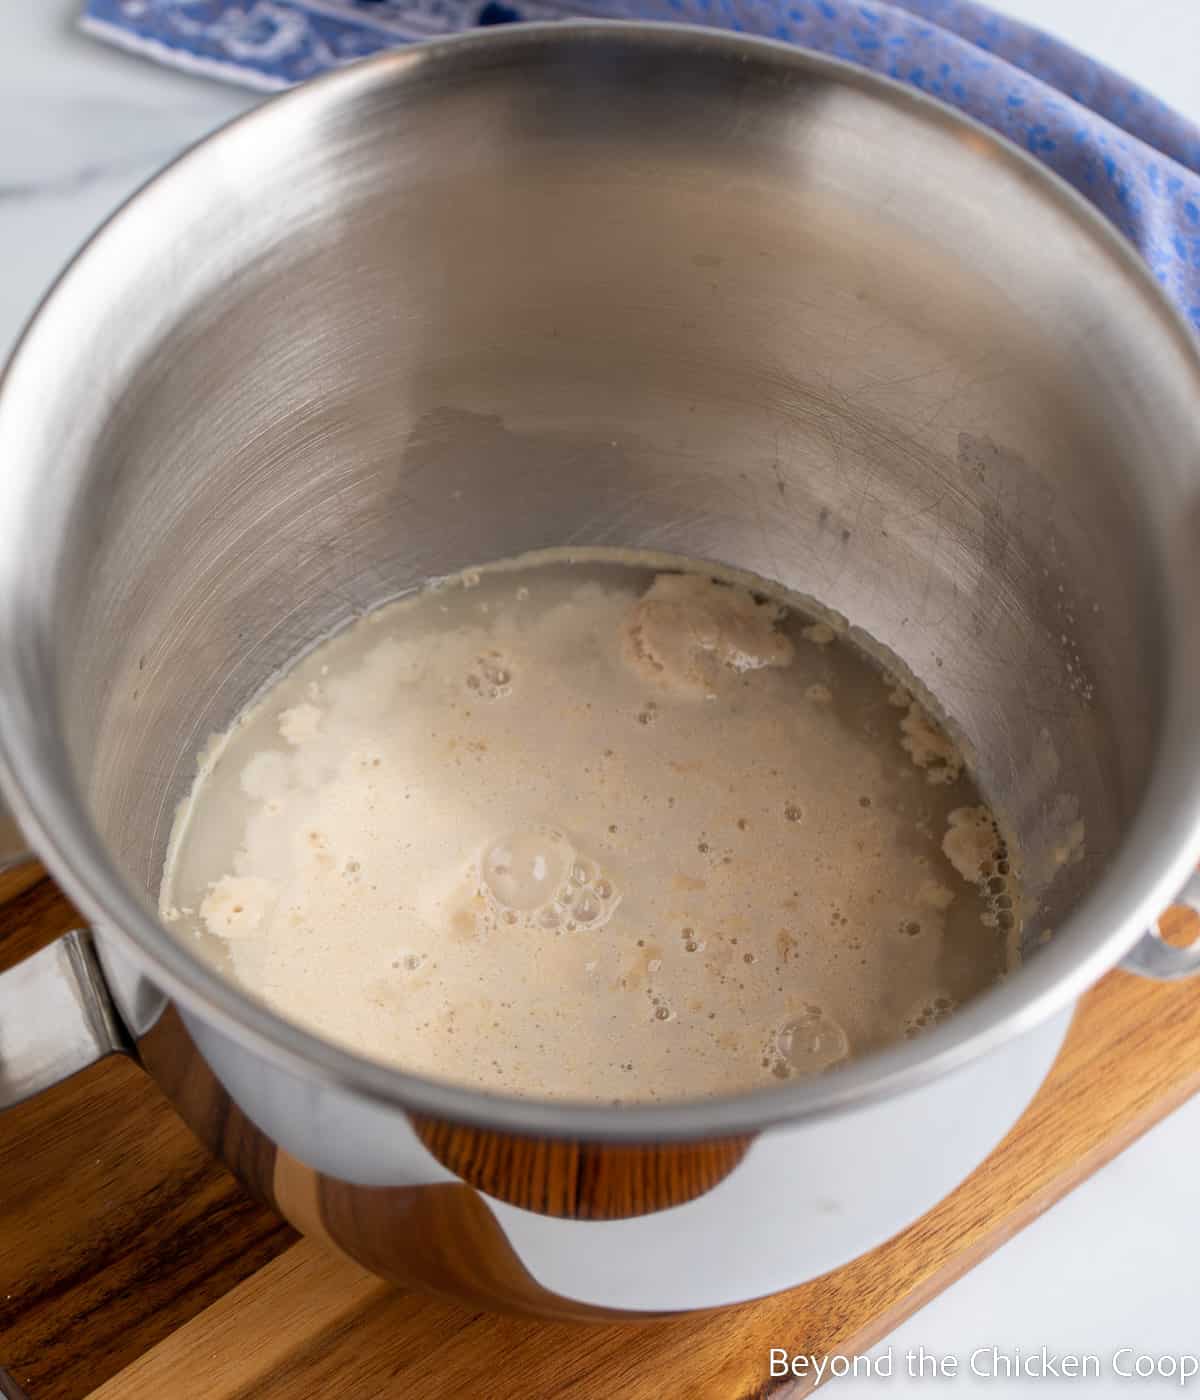 Bubbly yeast in a bowl. 